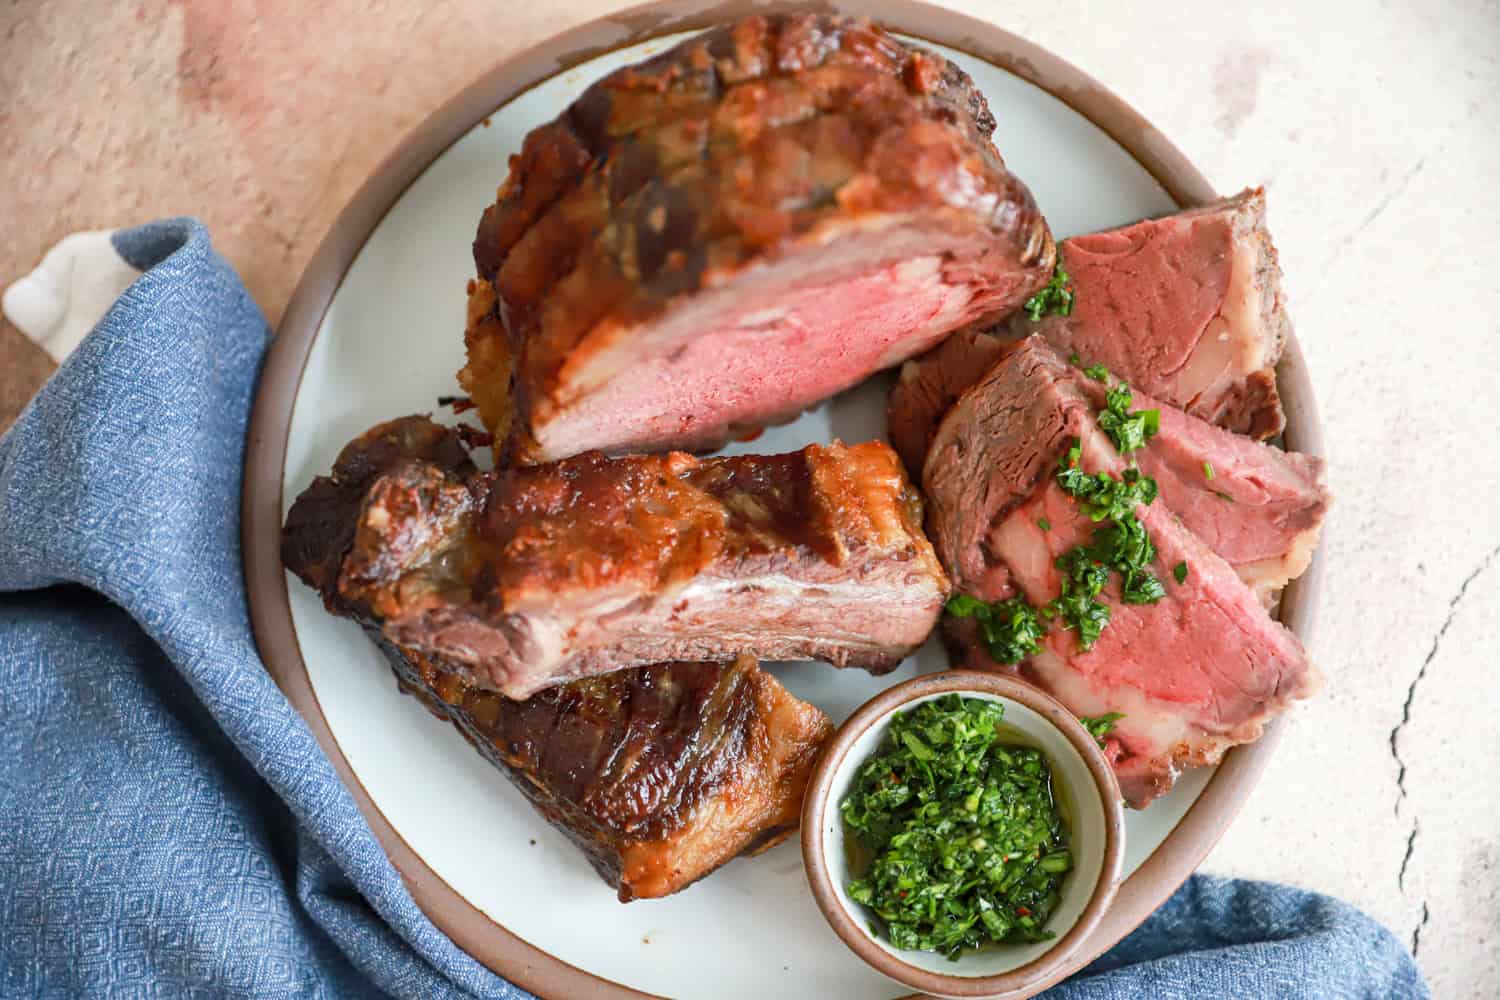 sliced prime rib with sauce for prime rib and roasted rib bones on round plate.